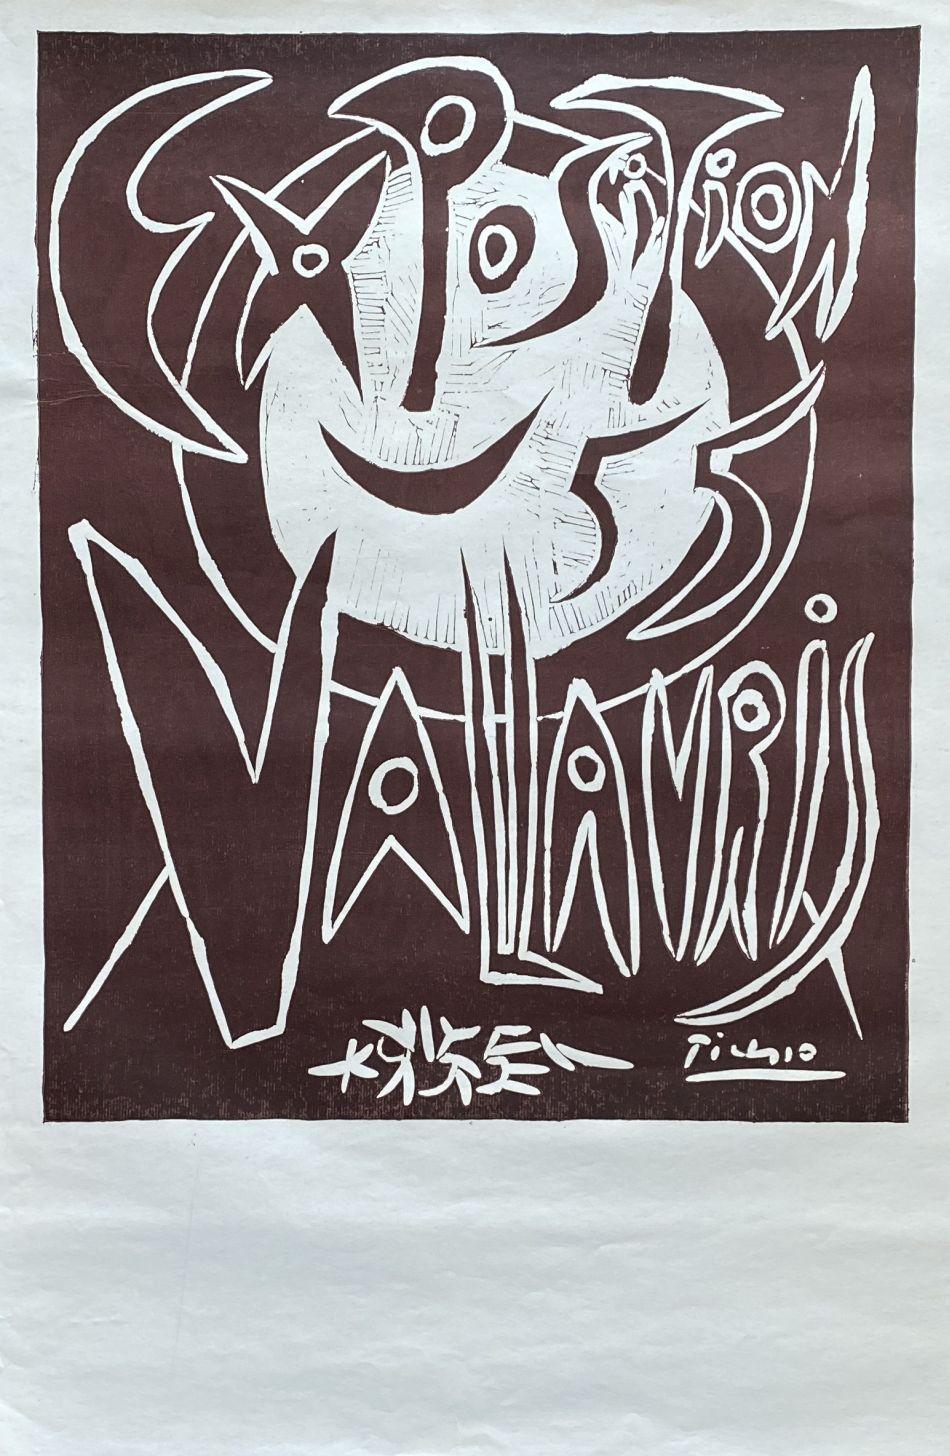 Pablo Picasso Interior Print - Exposition Vallauris 1955 - Tall Original Linocut Signed in the Plate 